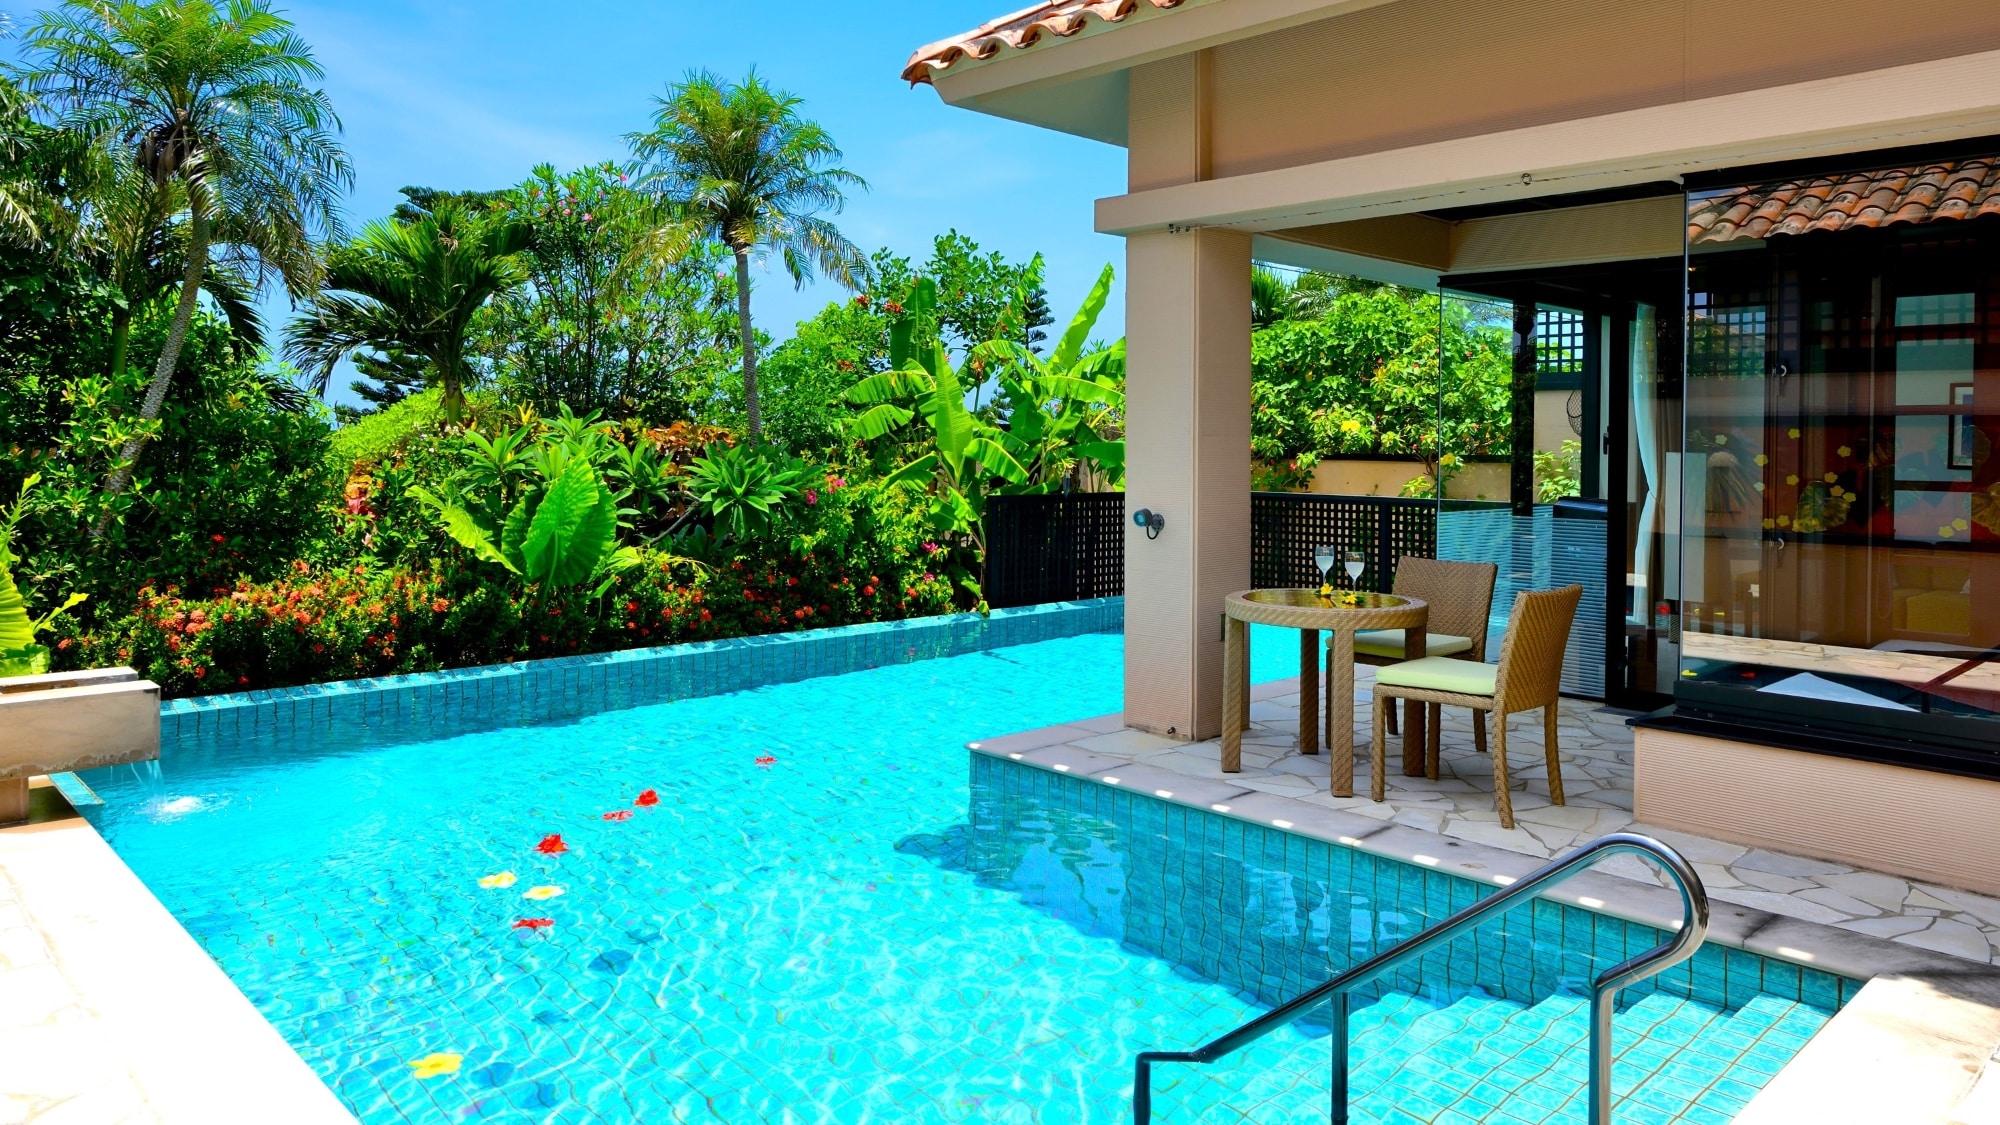 [Pool Villa Royal Suite] A room with a luxurious private pool that surrounds the villa